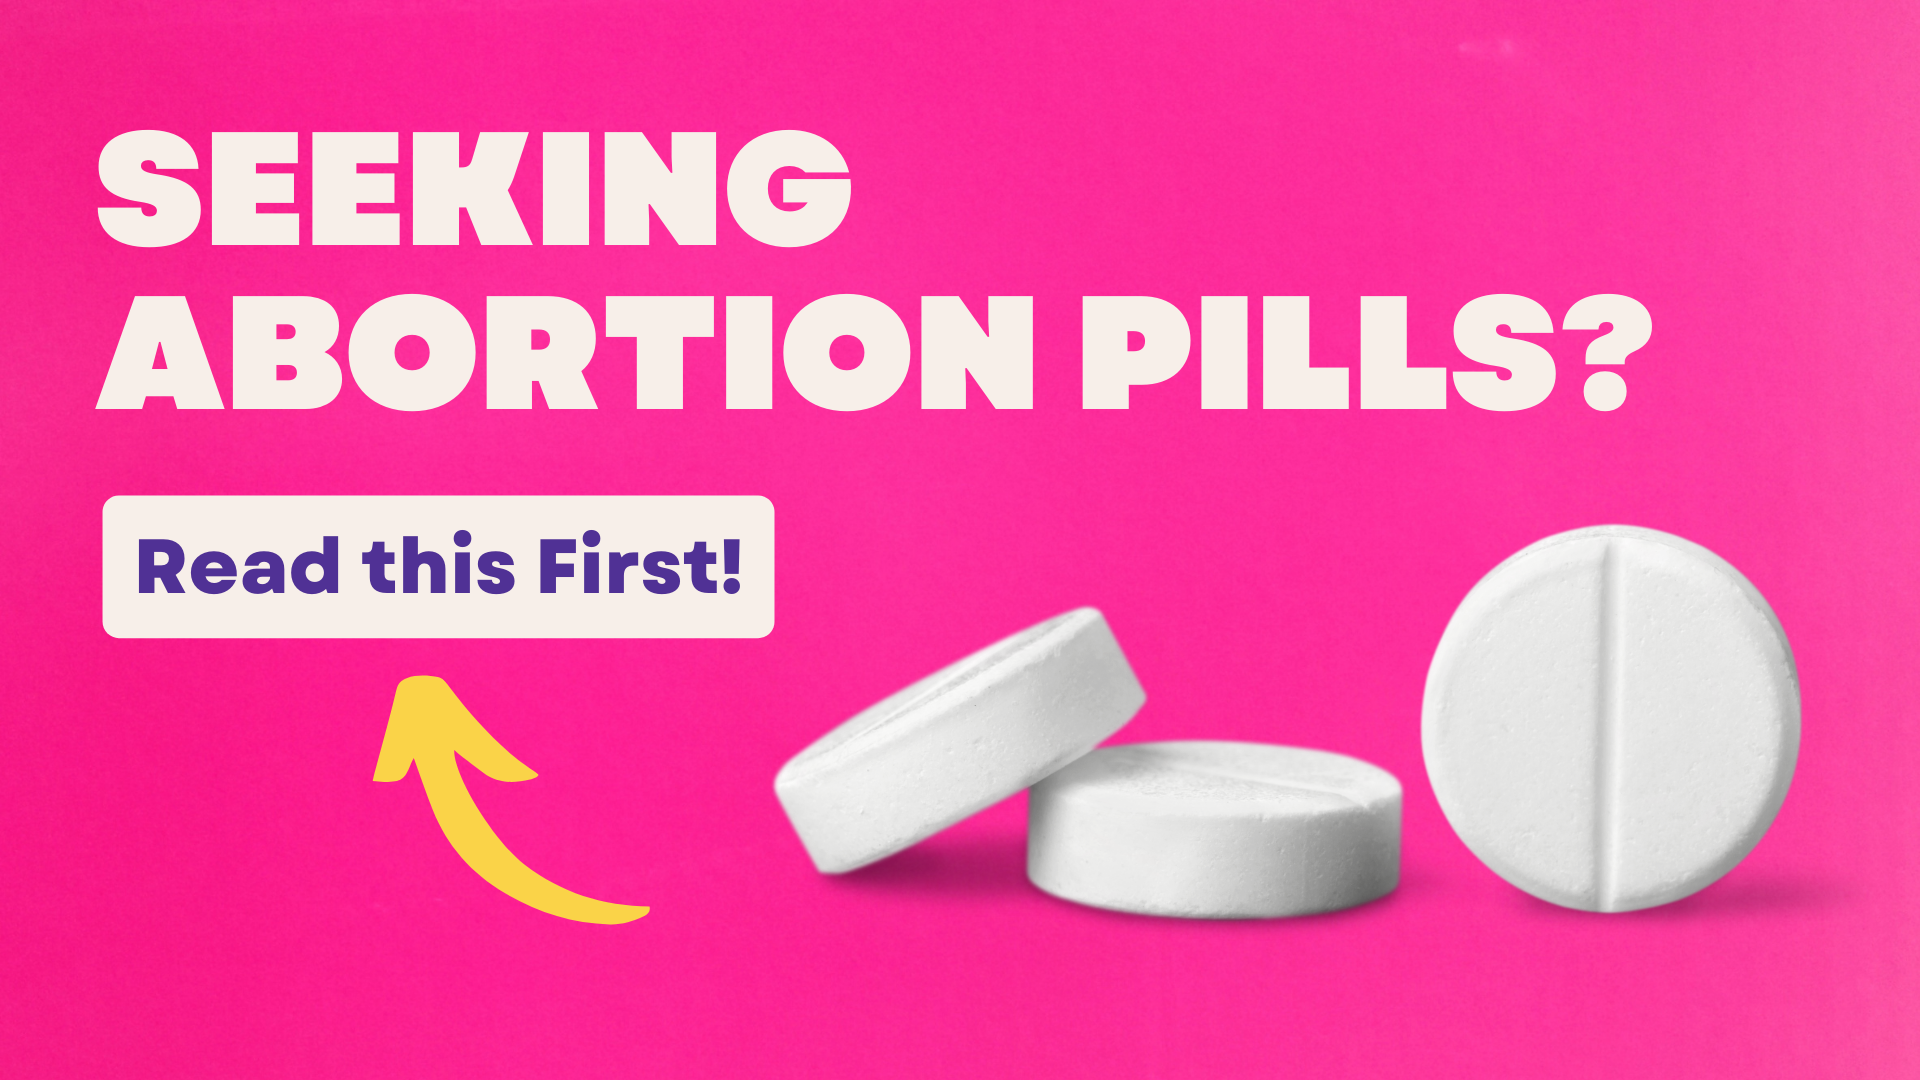 Seeking abortion pills in Detroit, Michigan? Read this first! 

Tags:
Abortion in Lathrup, free abortion in Lathrup, abortion Southfield, abortion Detroit, Free abortion, free abortion information, free abortion counseling, free ultrasound near me, free ultrasound, free pregnancy test near me, abortion pills near me, free abortion pills, free abortion pills near me, planned parenthood near me, planned parenthood for free, abortion Detroit, abortion Southfield, abortion in Michigan, the Problem Pregnancy Center, abortion cost, abortion free near me, abortion pills free near me, I need an abortion, I need an abortion fast, I'm pregnancy and need help.